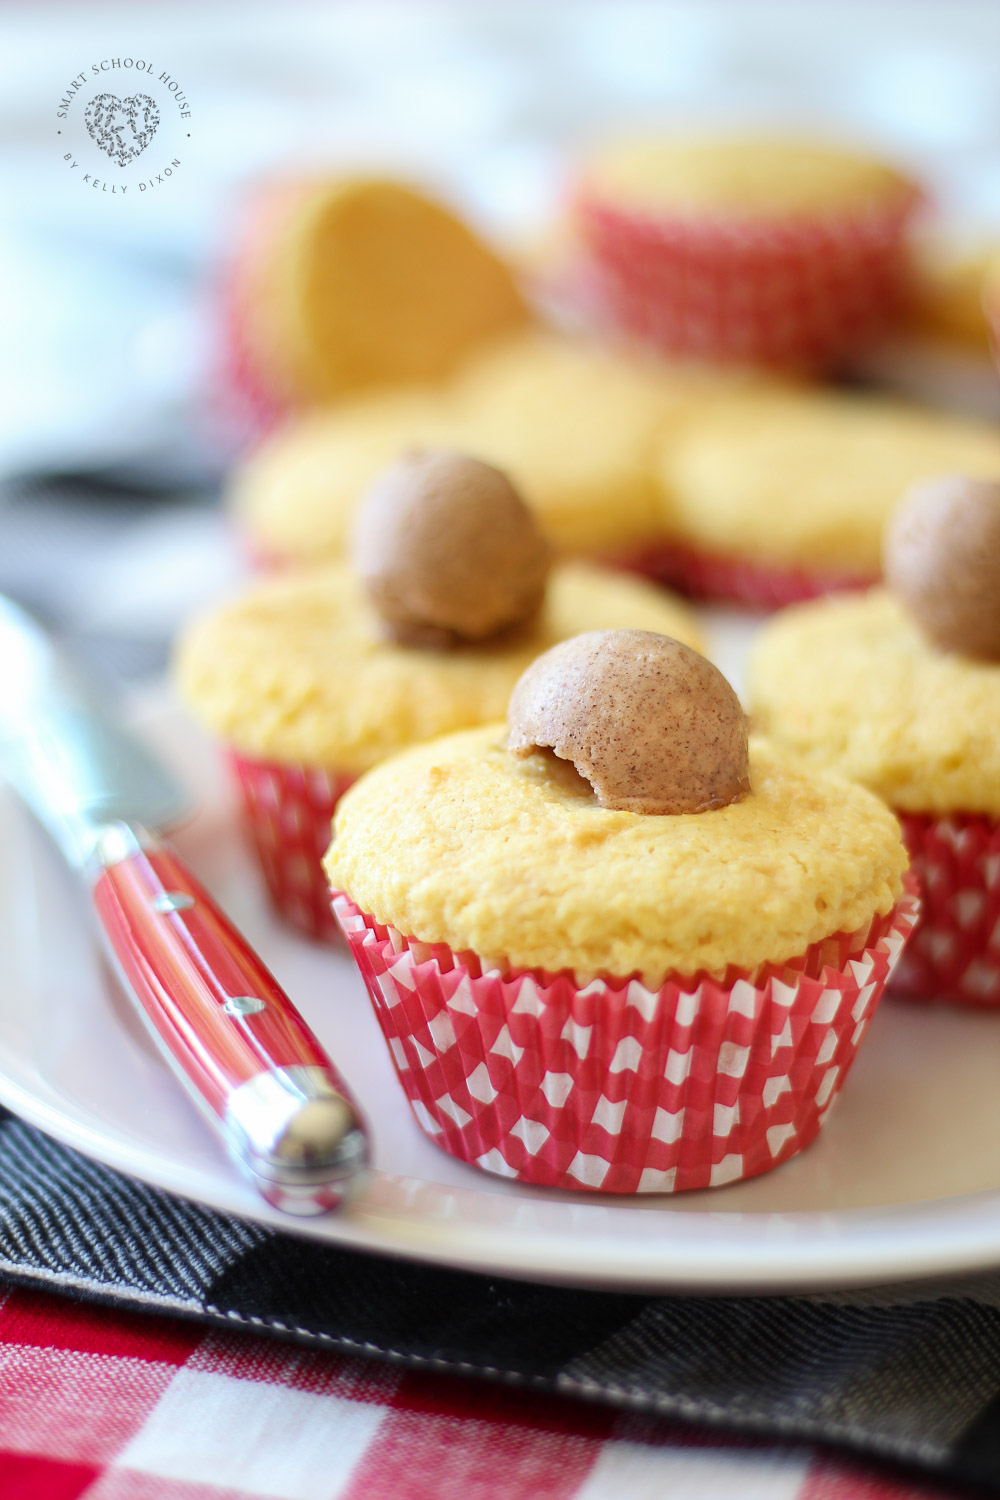 These sweet and fluffy cornbread cupcakes are made with both cake batter and cornbread mix then topped with cinnamon butter. Perfect for a summer for fall BBQ. Even on a cold winter evening, these are the coziest after-dinner treat. They go really well with any crock pot recipe your family loves. #cornbread #cupcakes